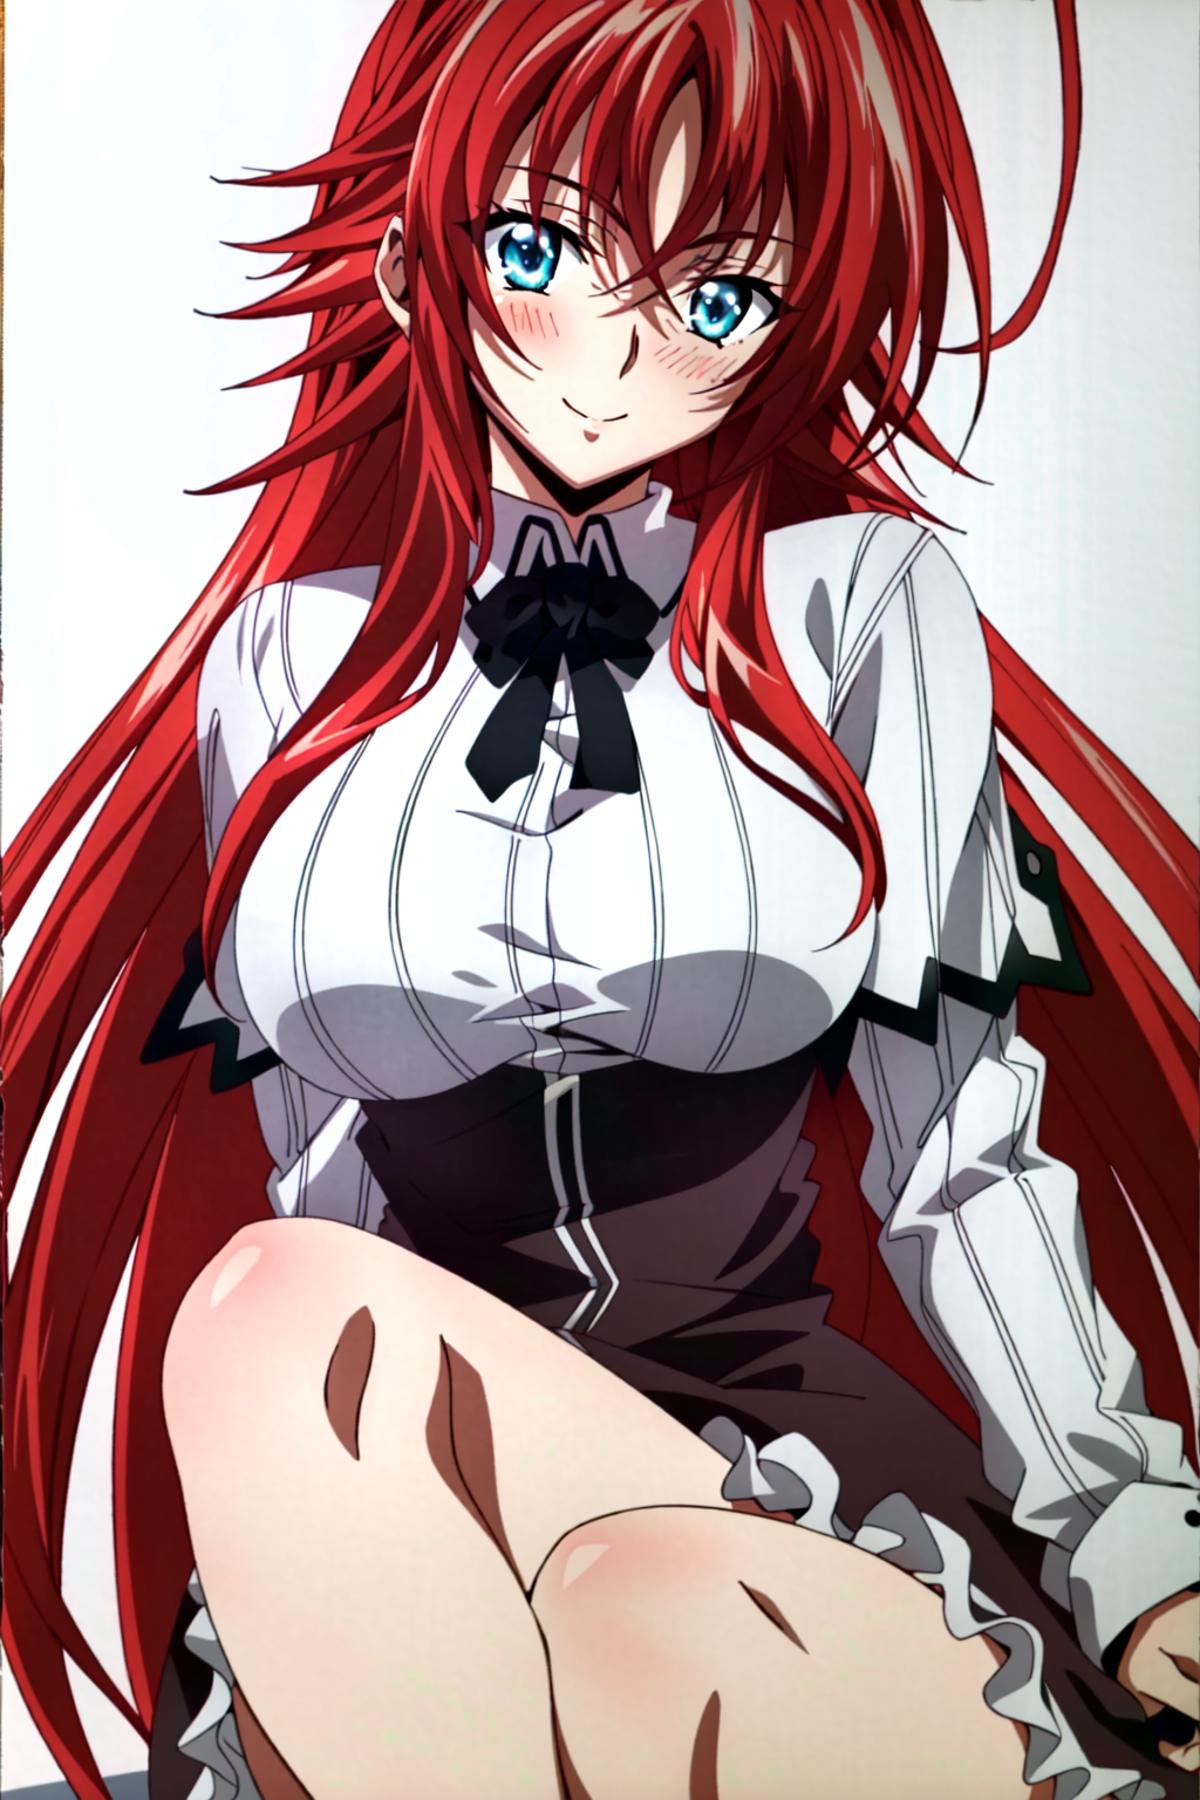 Rias Gremory - High School DxD image by OG_Turles